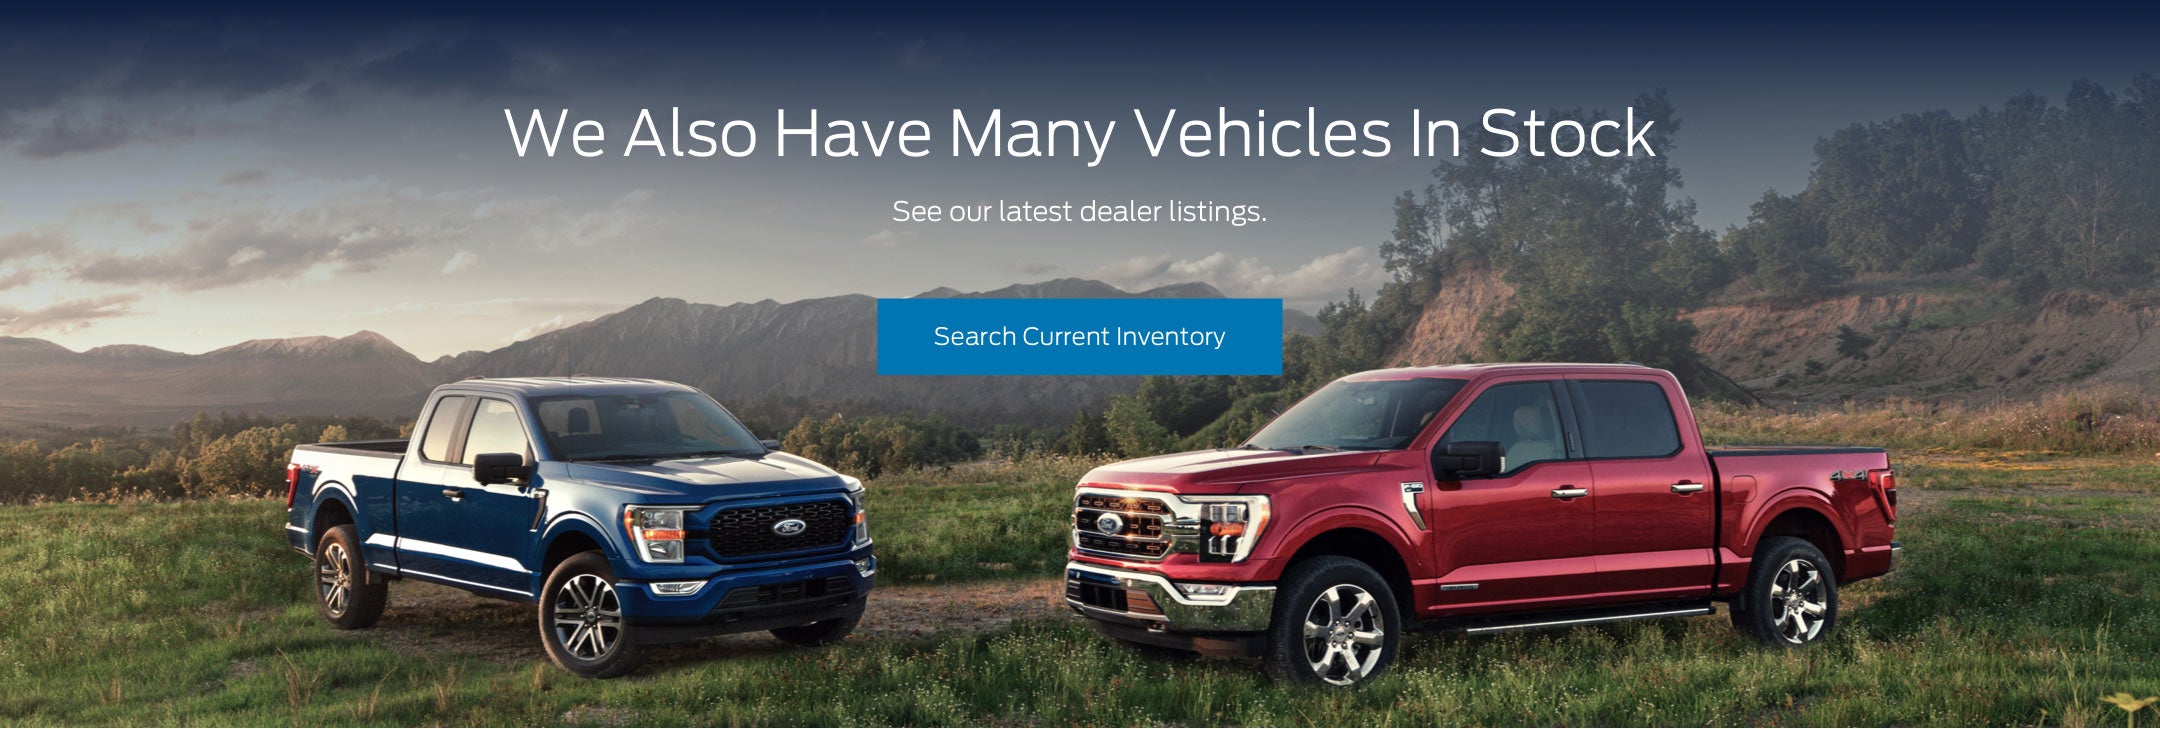 Ford vehicles in stock | Murray Ford of Starke in Starke FL